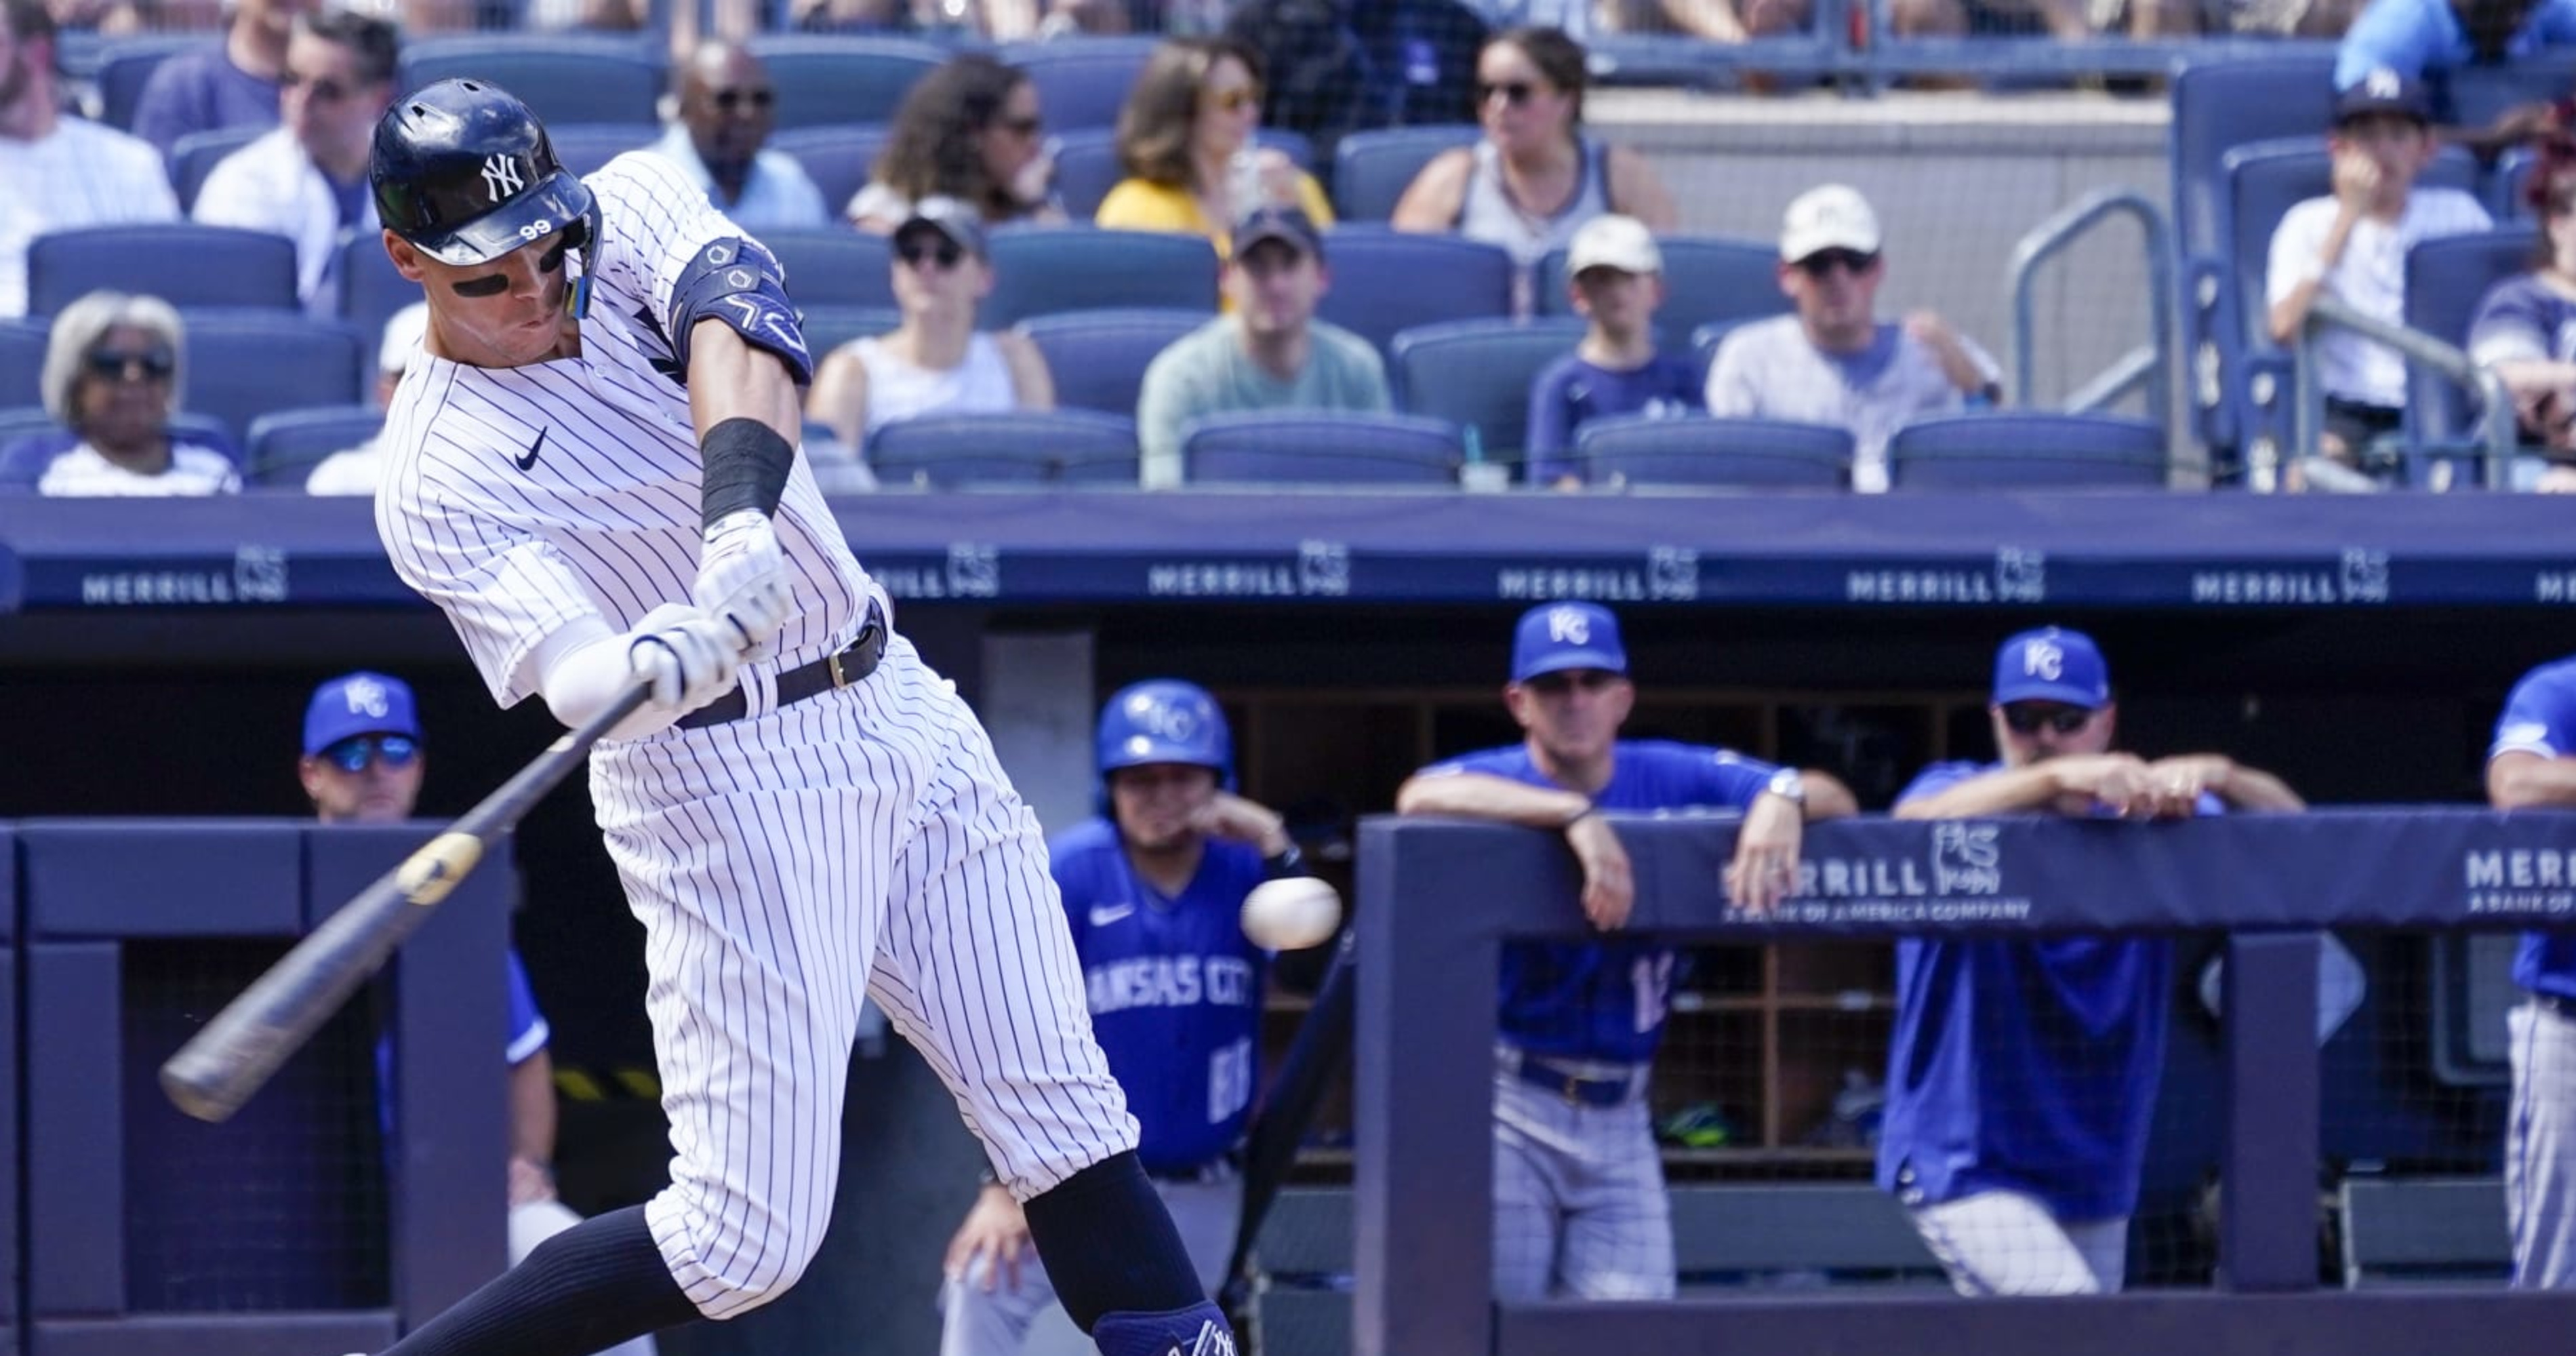 Aaron Judge Breaks Babe Ruth's Yankees Record for Most HRs at Home